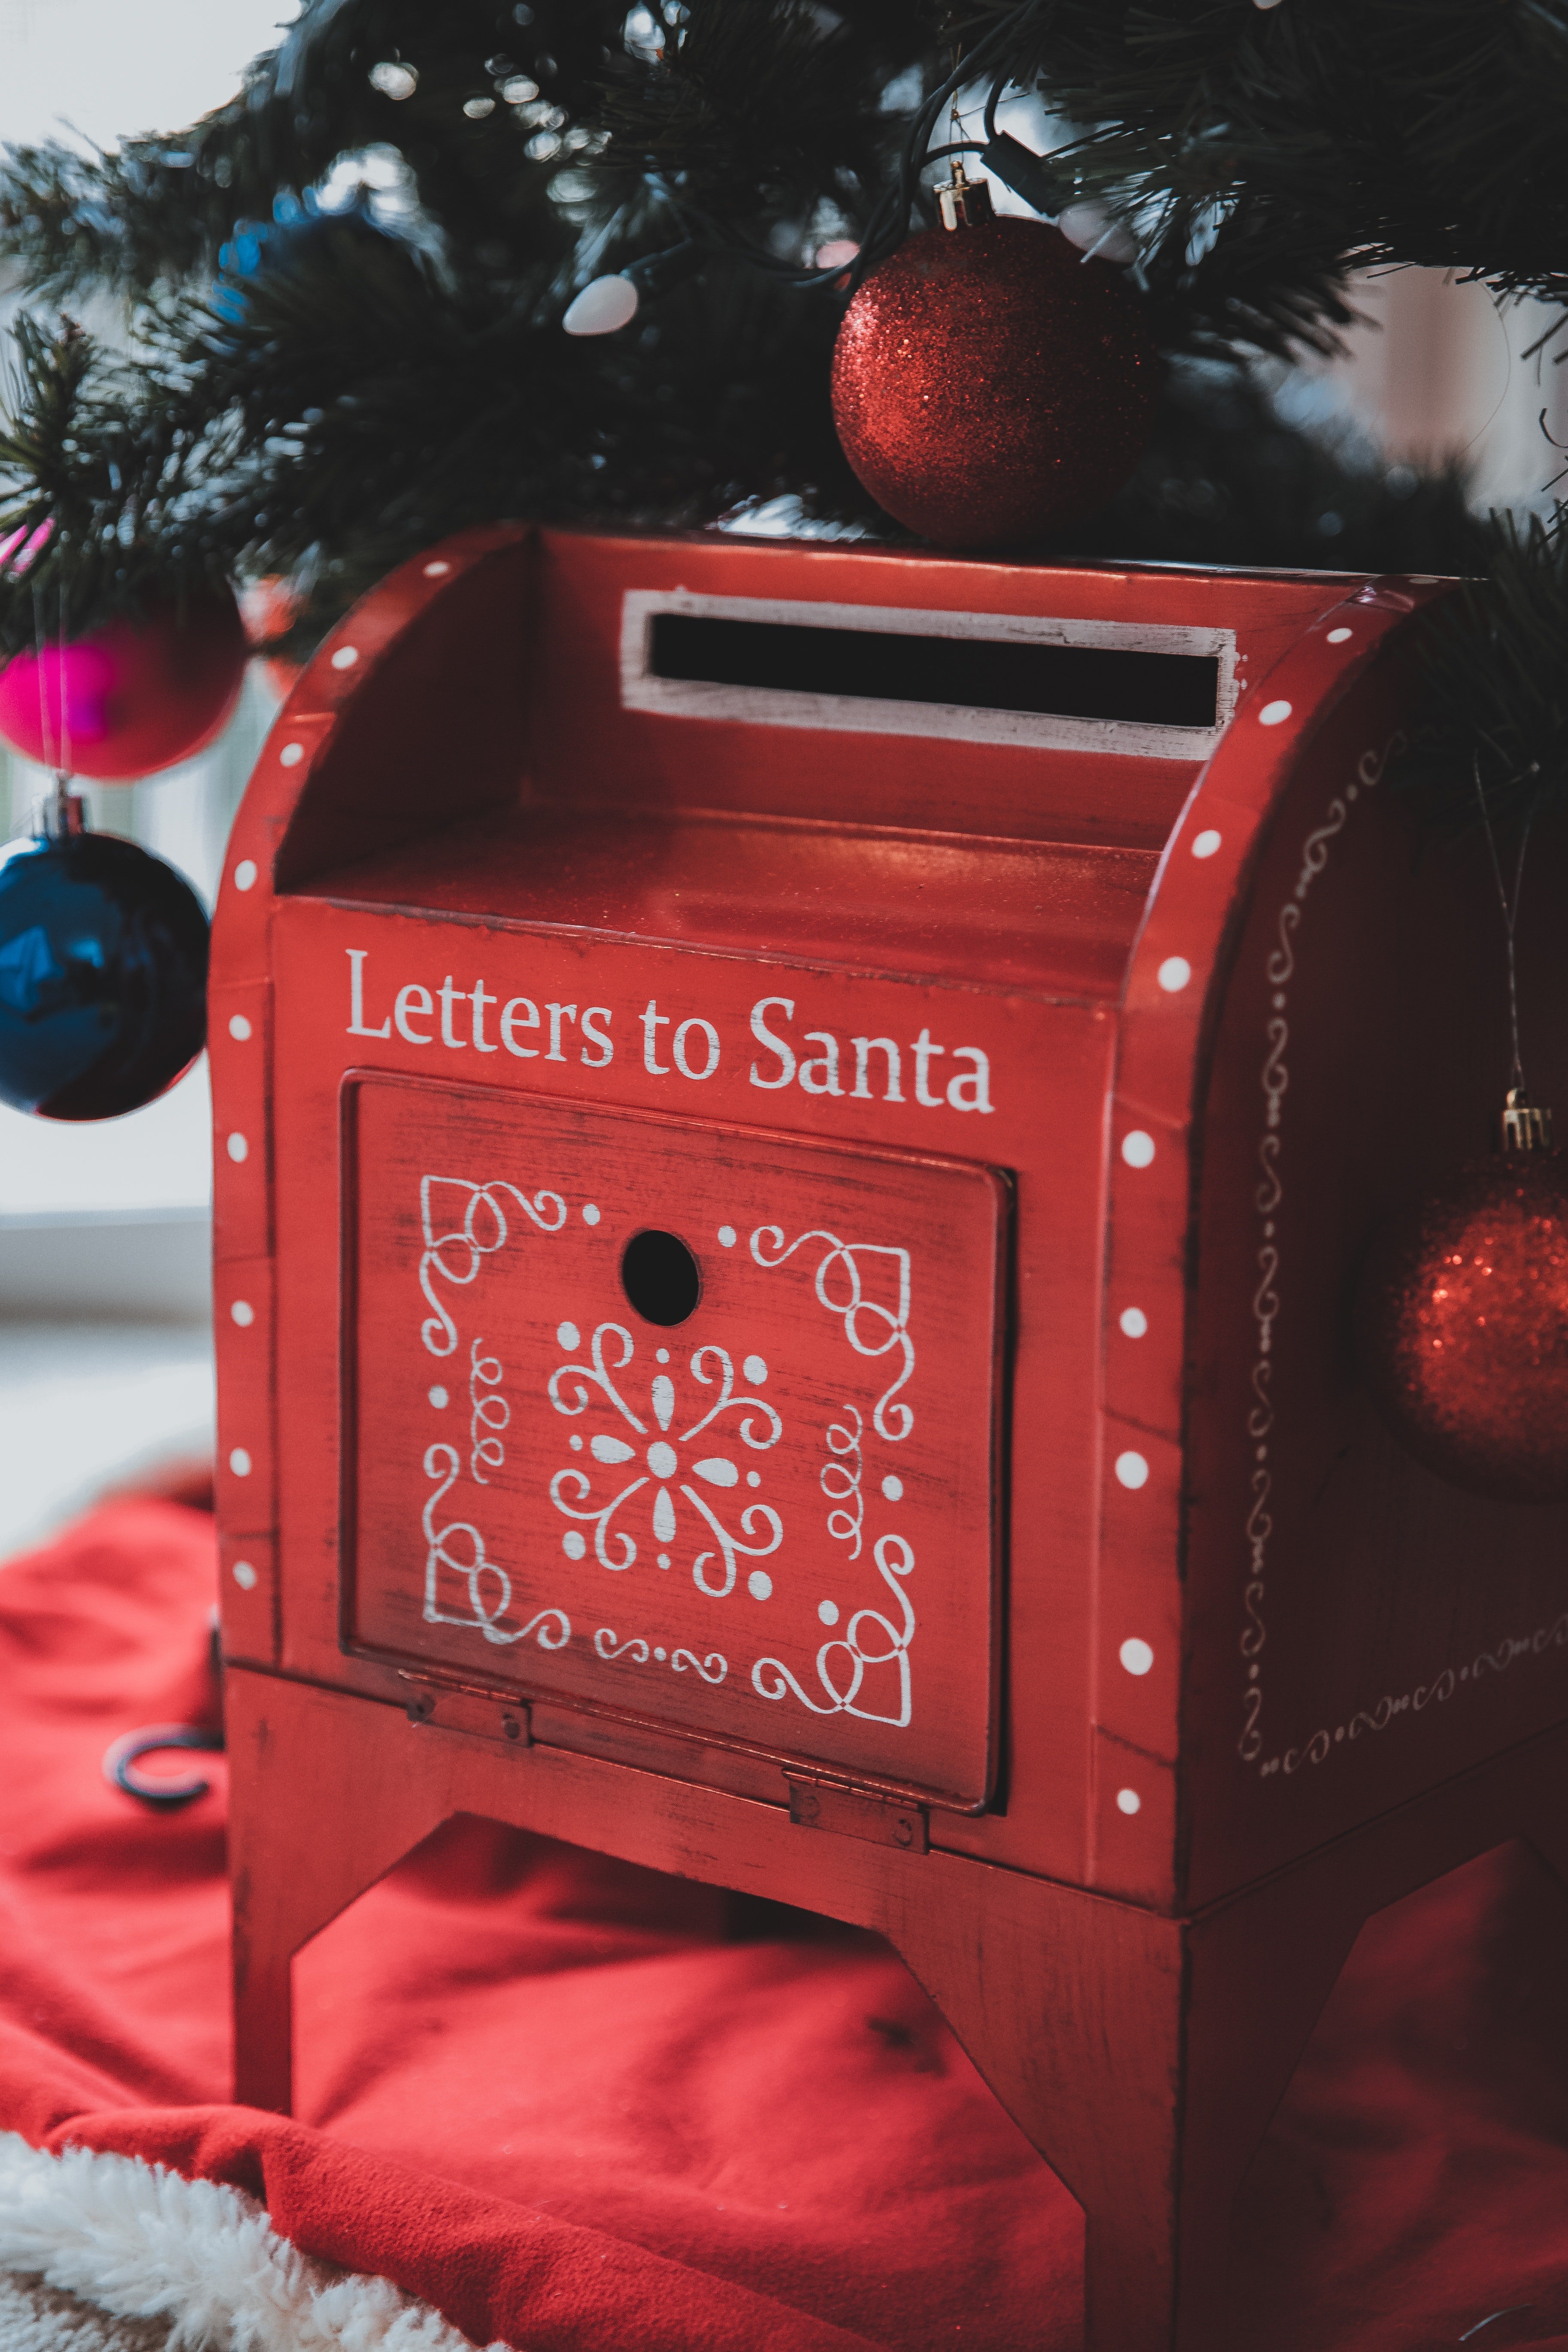 Sam wanted to send a letter to Santa | Photo: Pexels